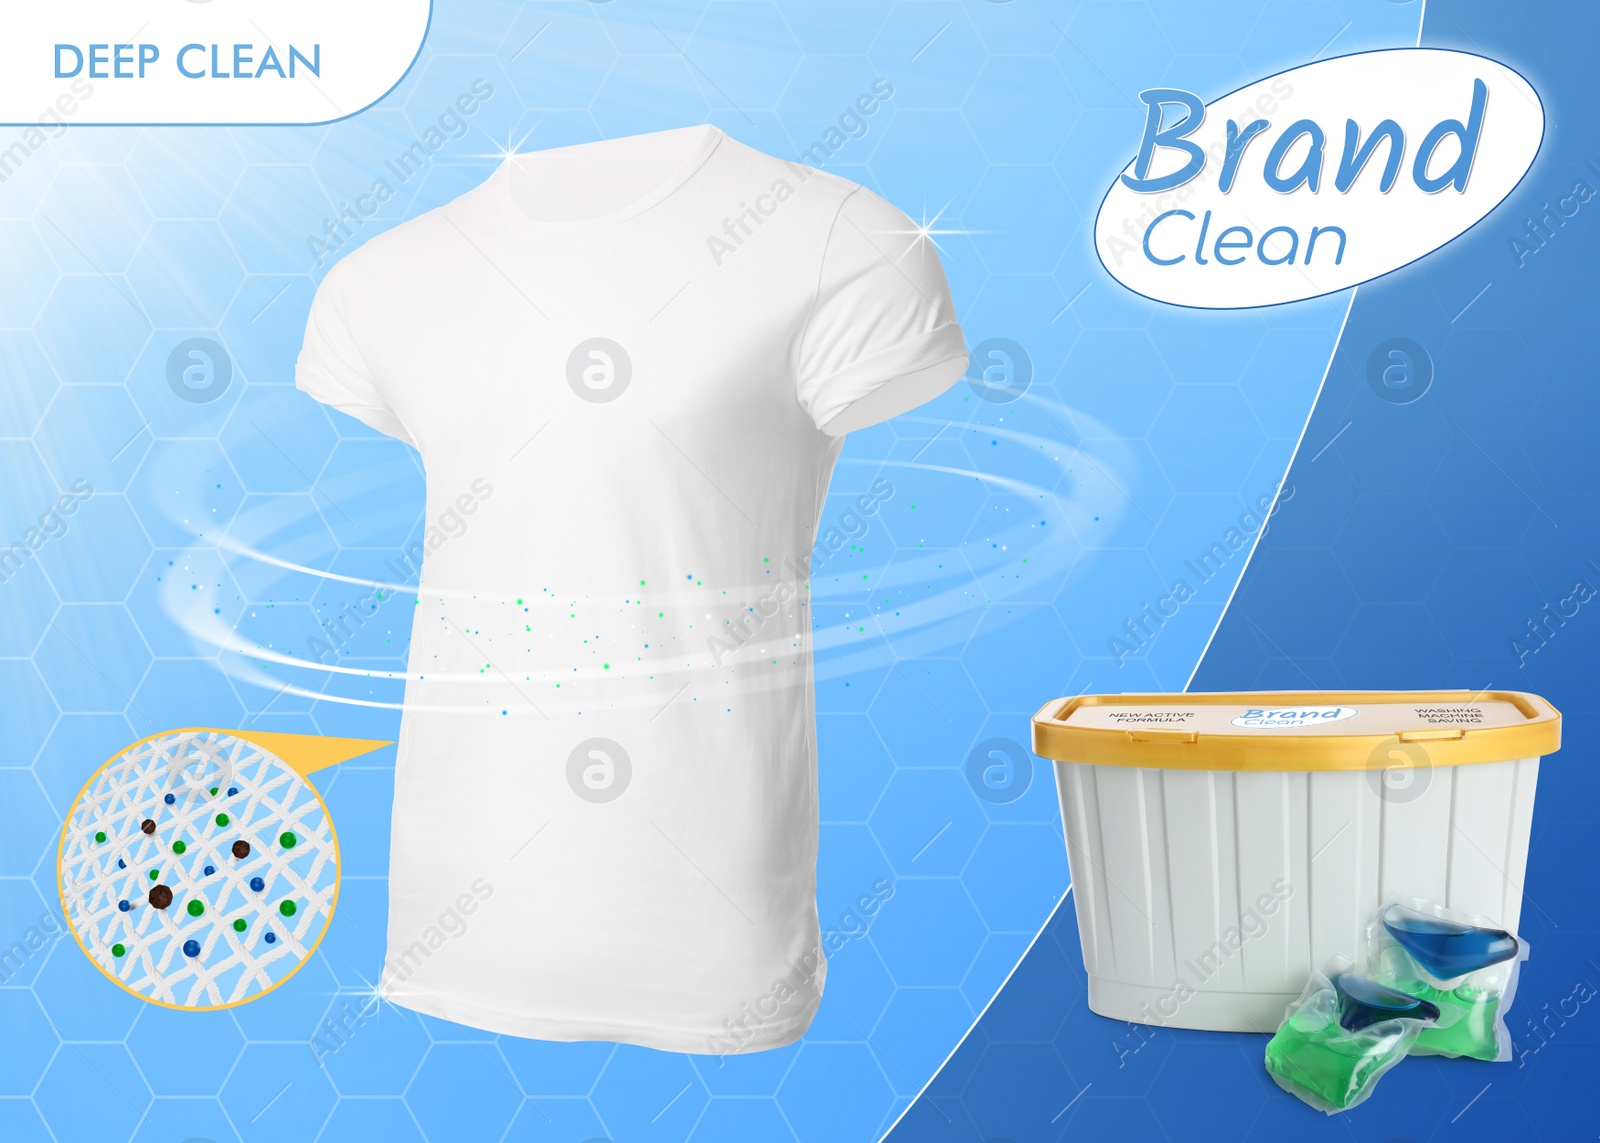 Image of Laundry capsules advertisement design. Clean white t-shirt and washing product